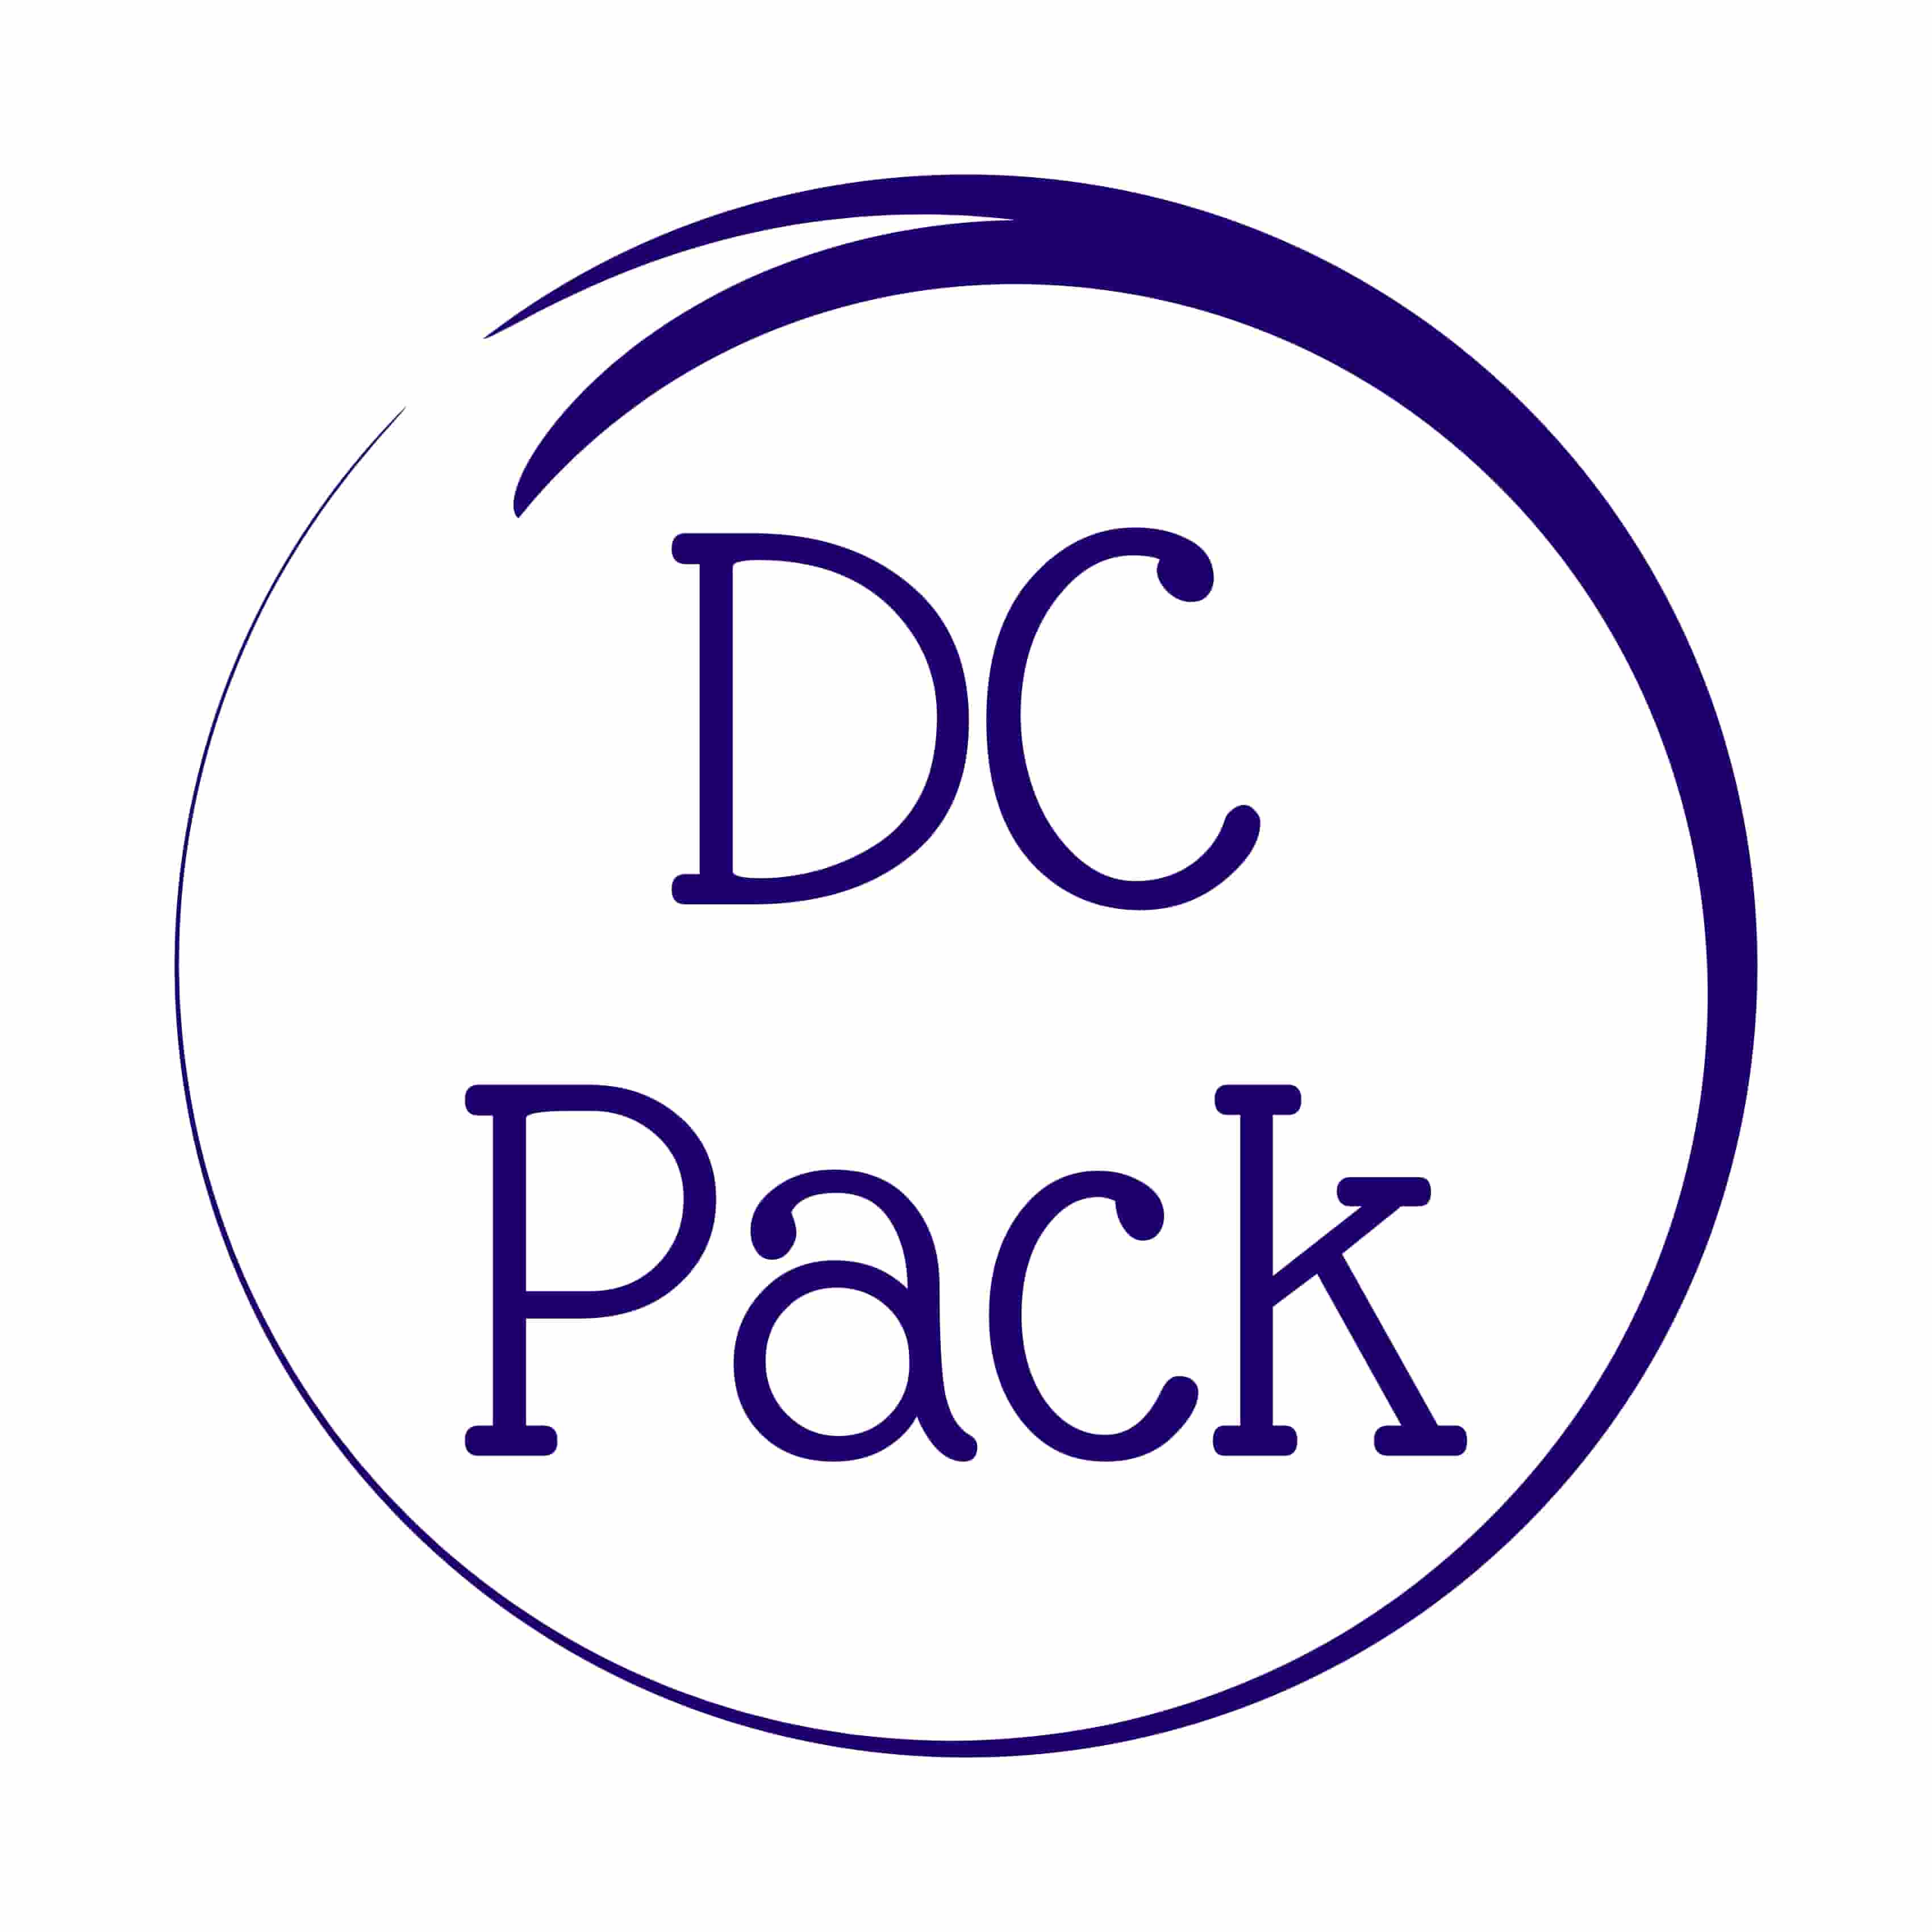 Dacalle's pack